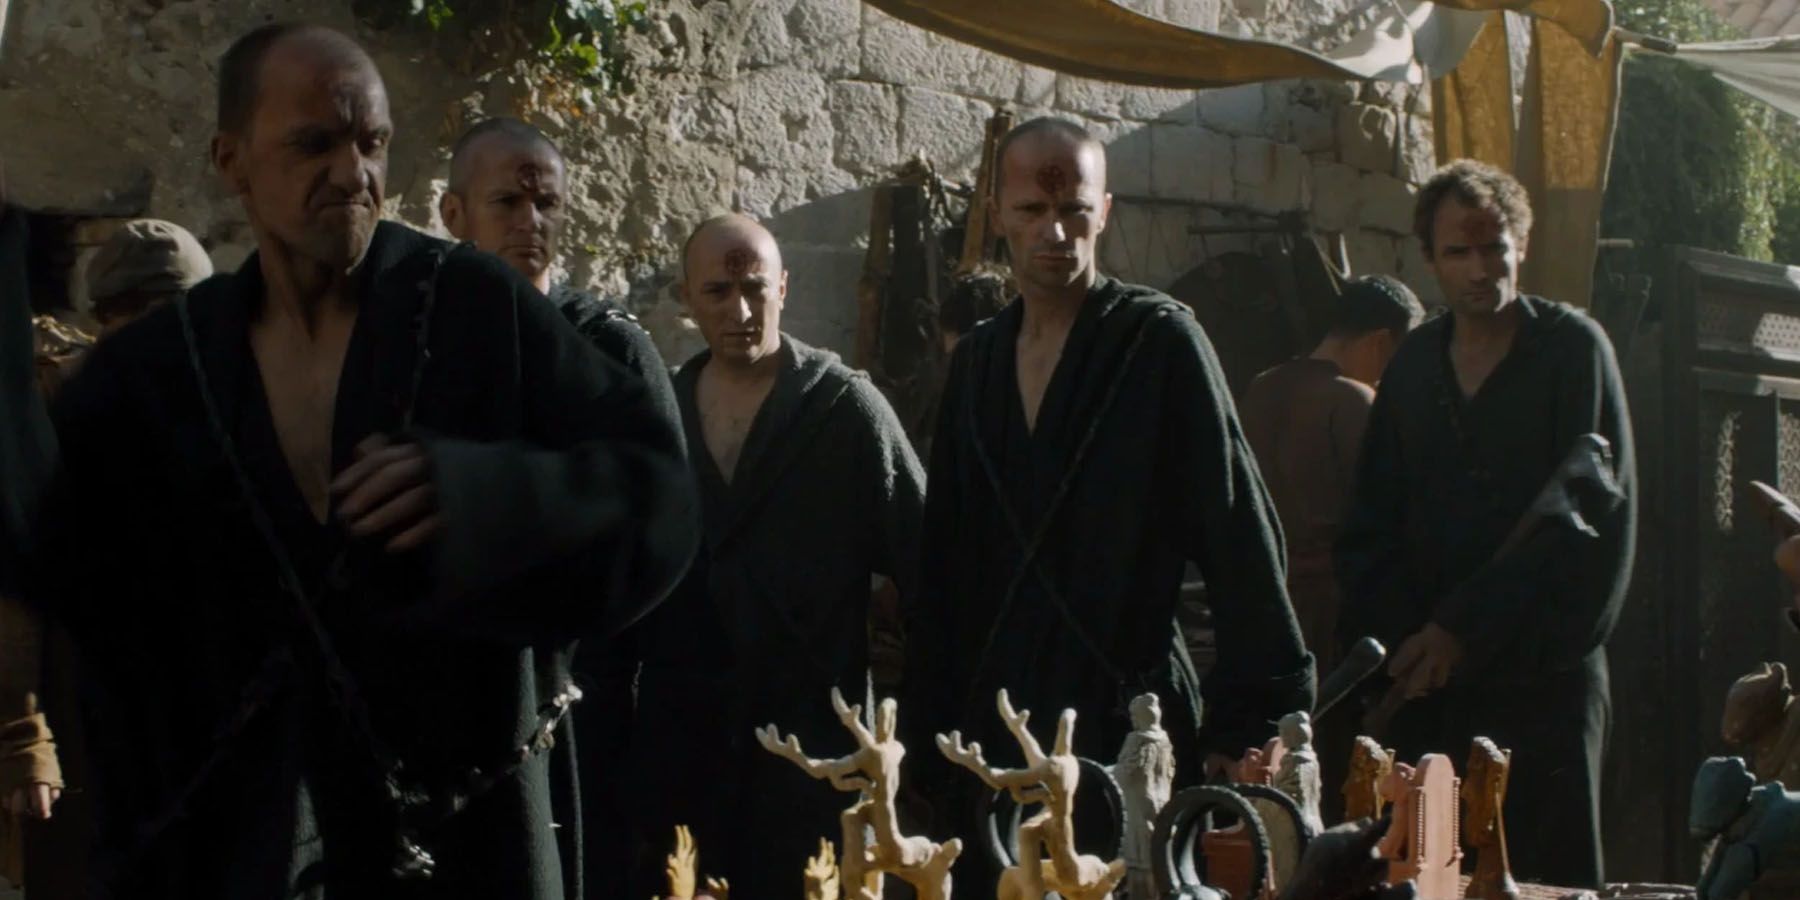 The Faith Militant in Game of Thrones.